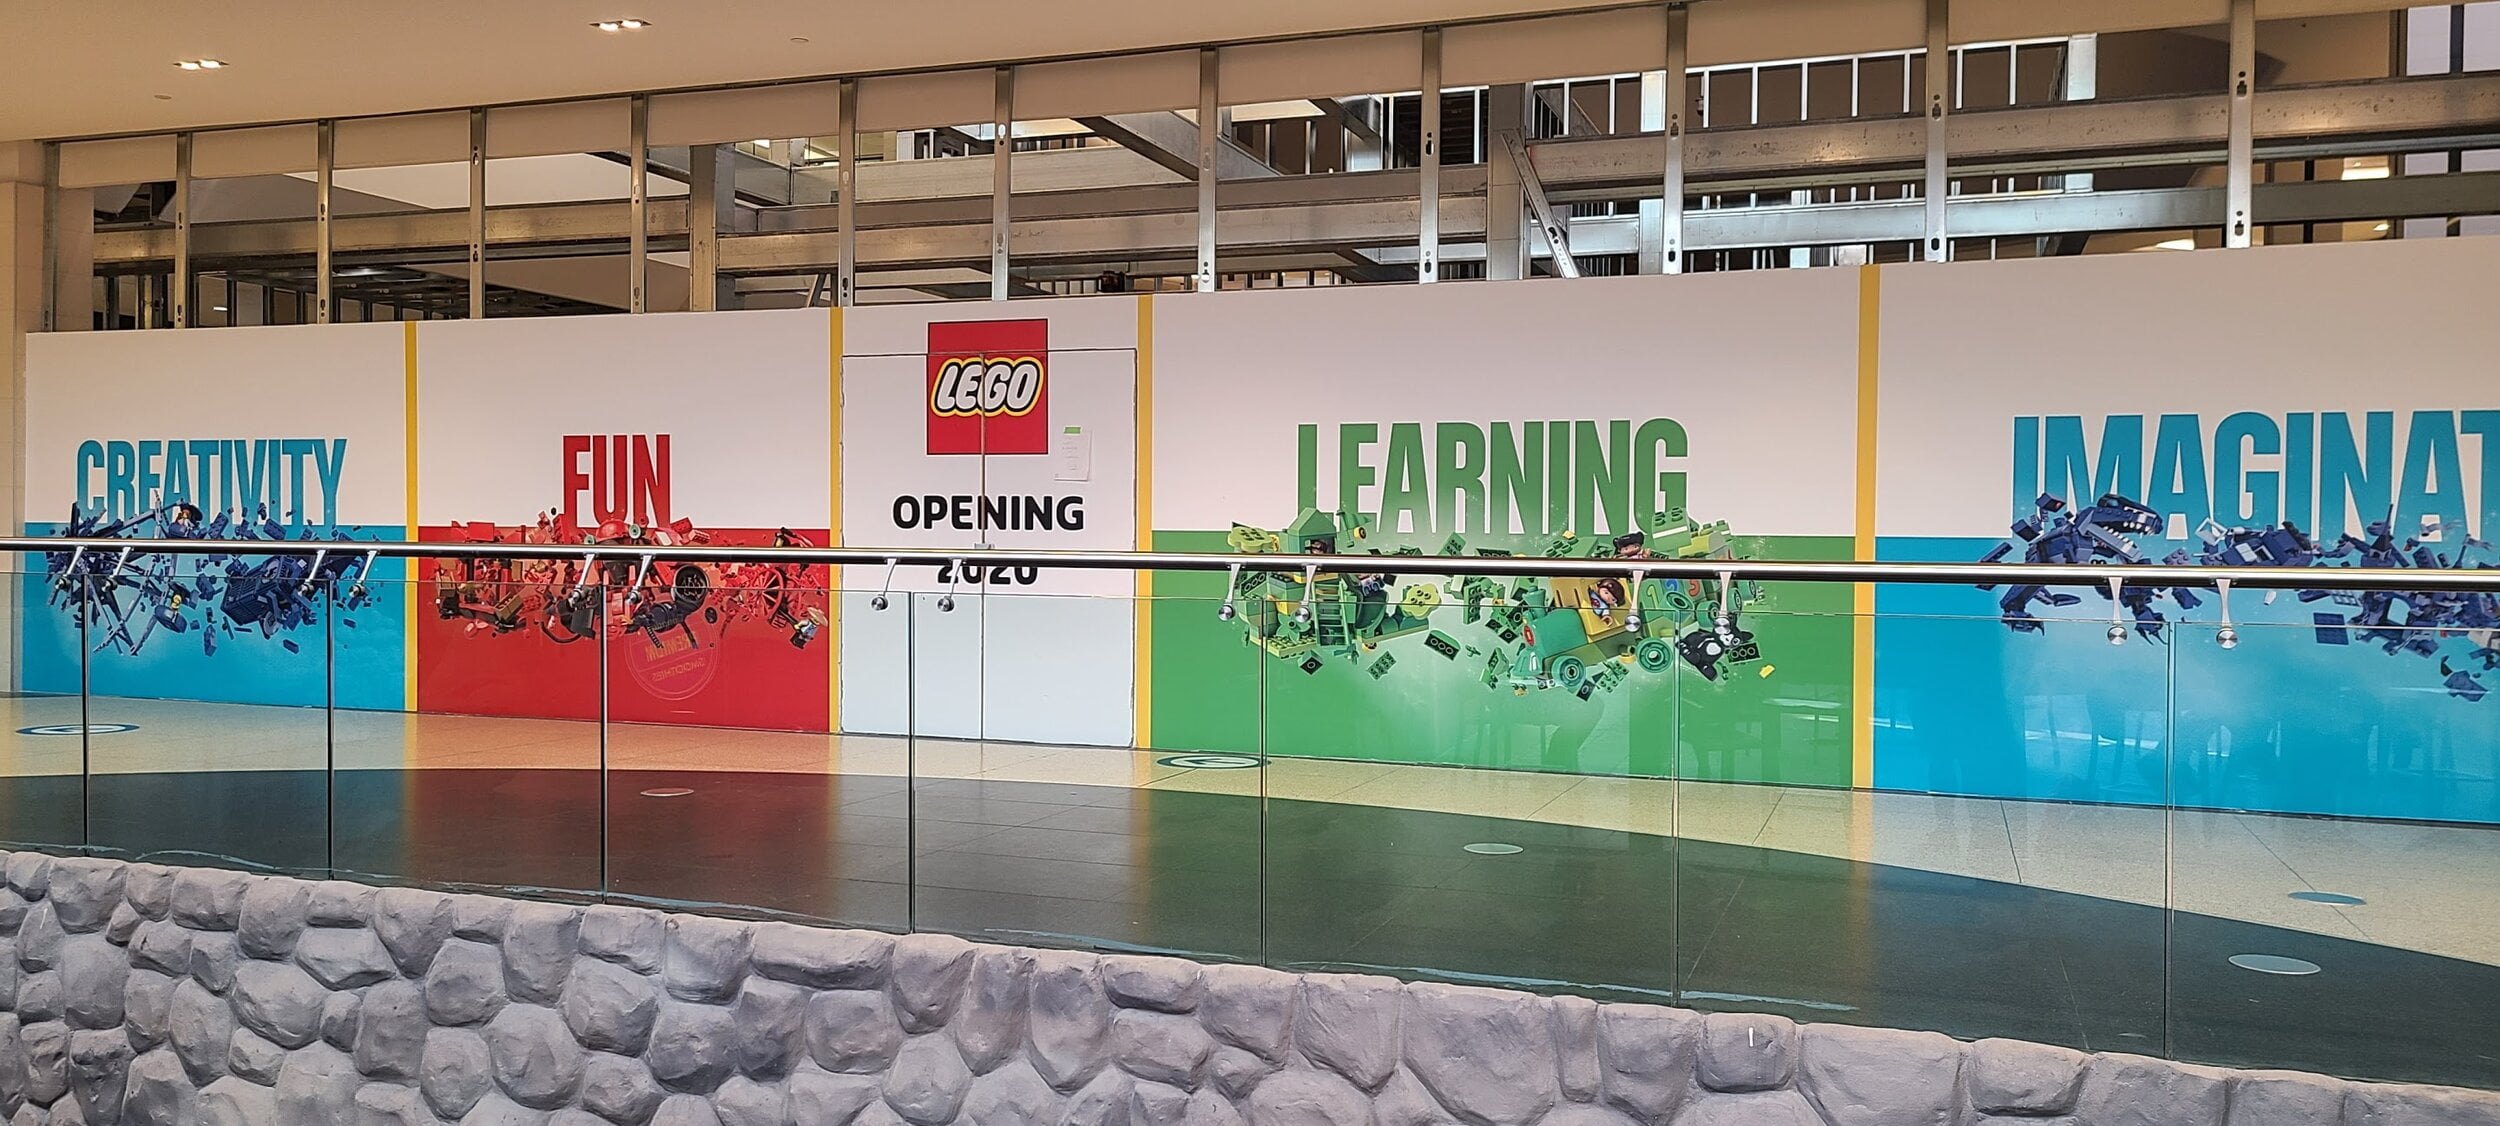 Lego To Open Experiential Retail Space At West Edmonton Mall This Fall